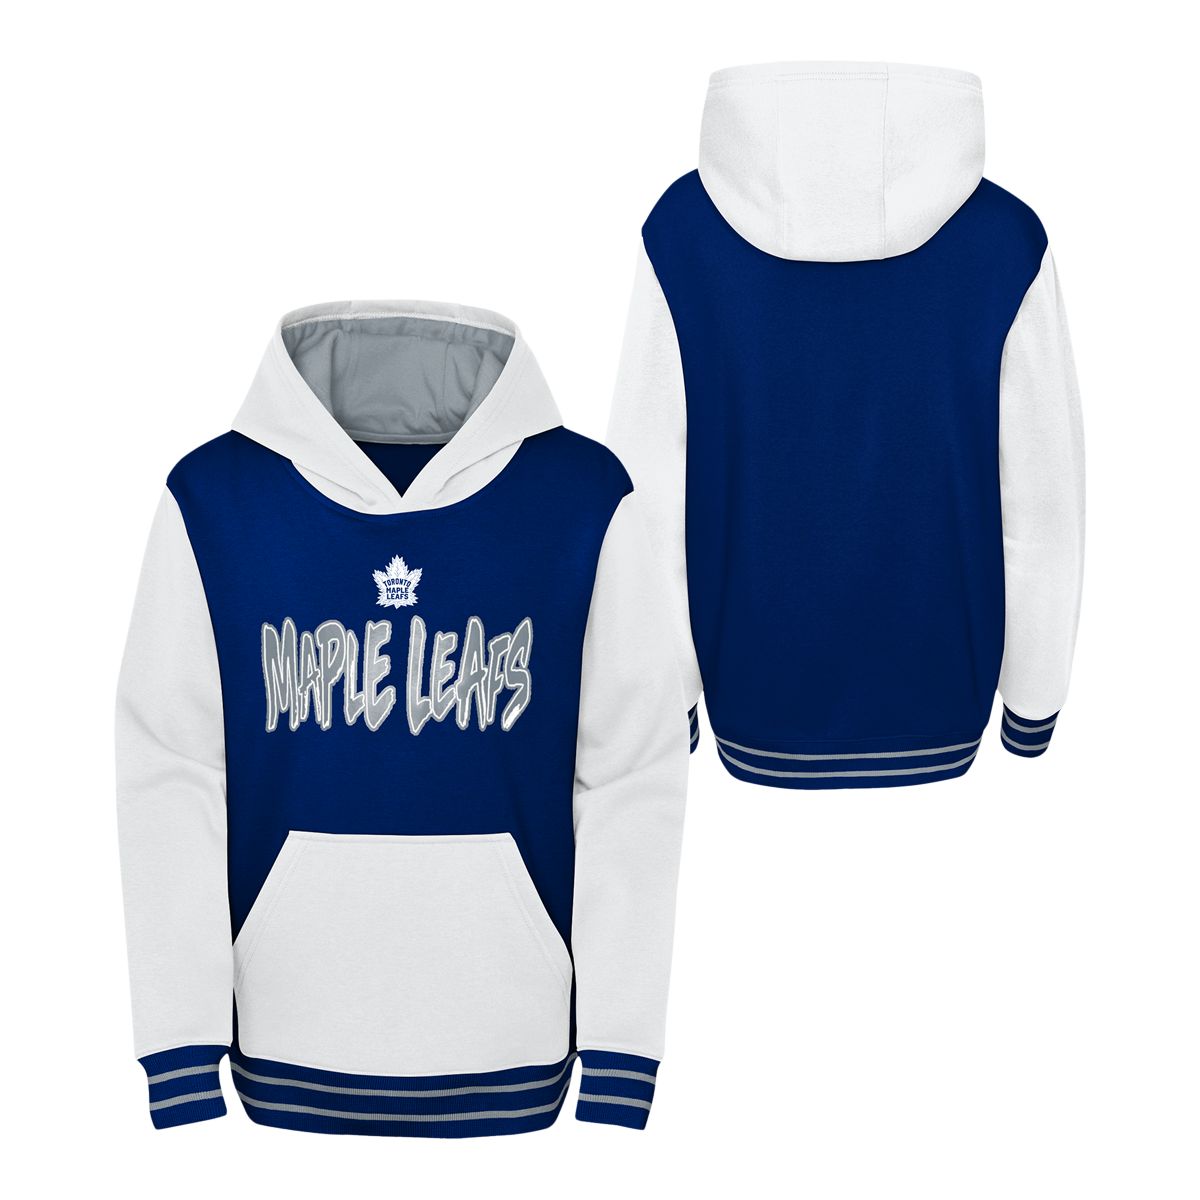 Outerstuff Reverse Retro Pullover Fleece Hoodie - Vancouver Canucks - Youth - Vancouver Canucks - M